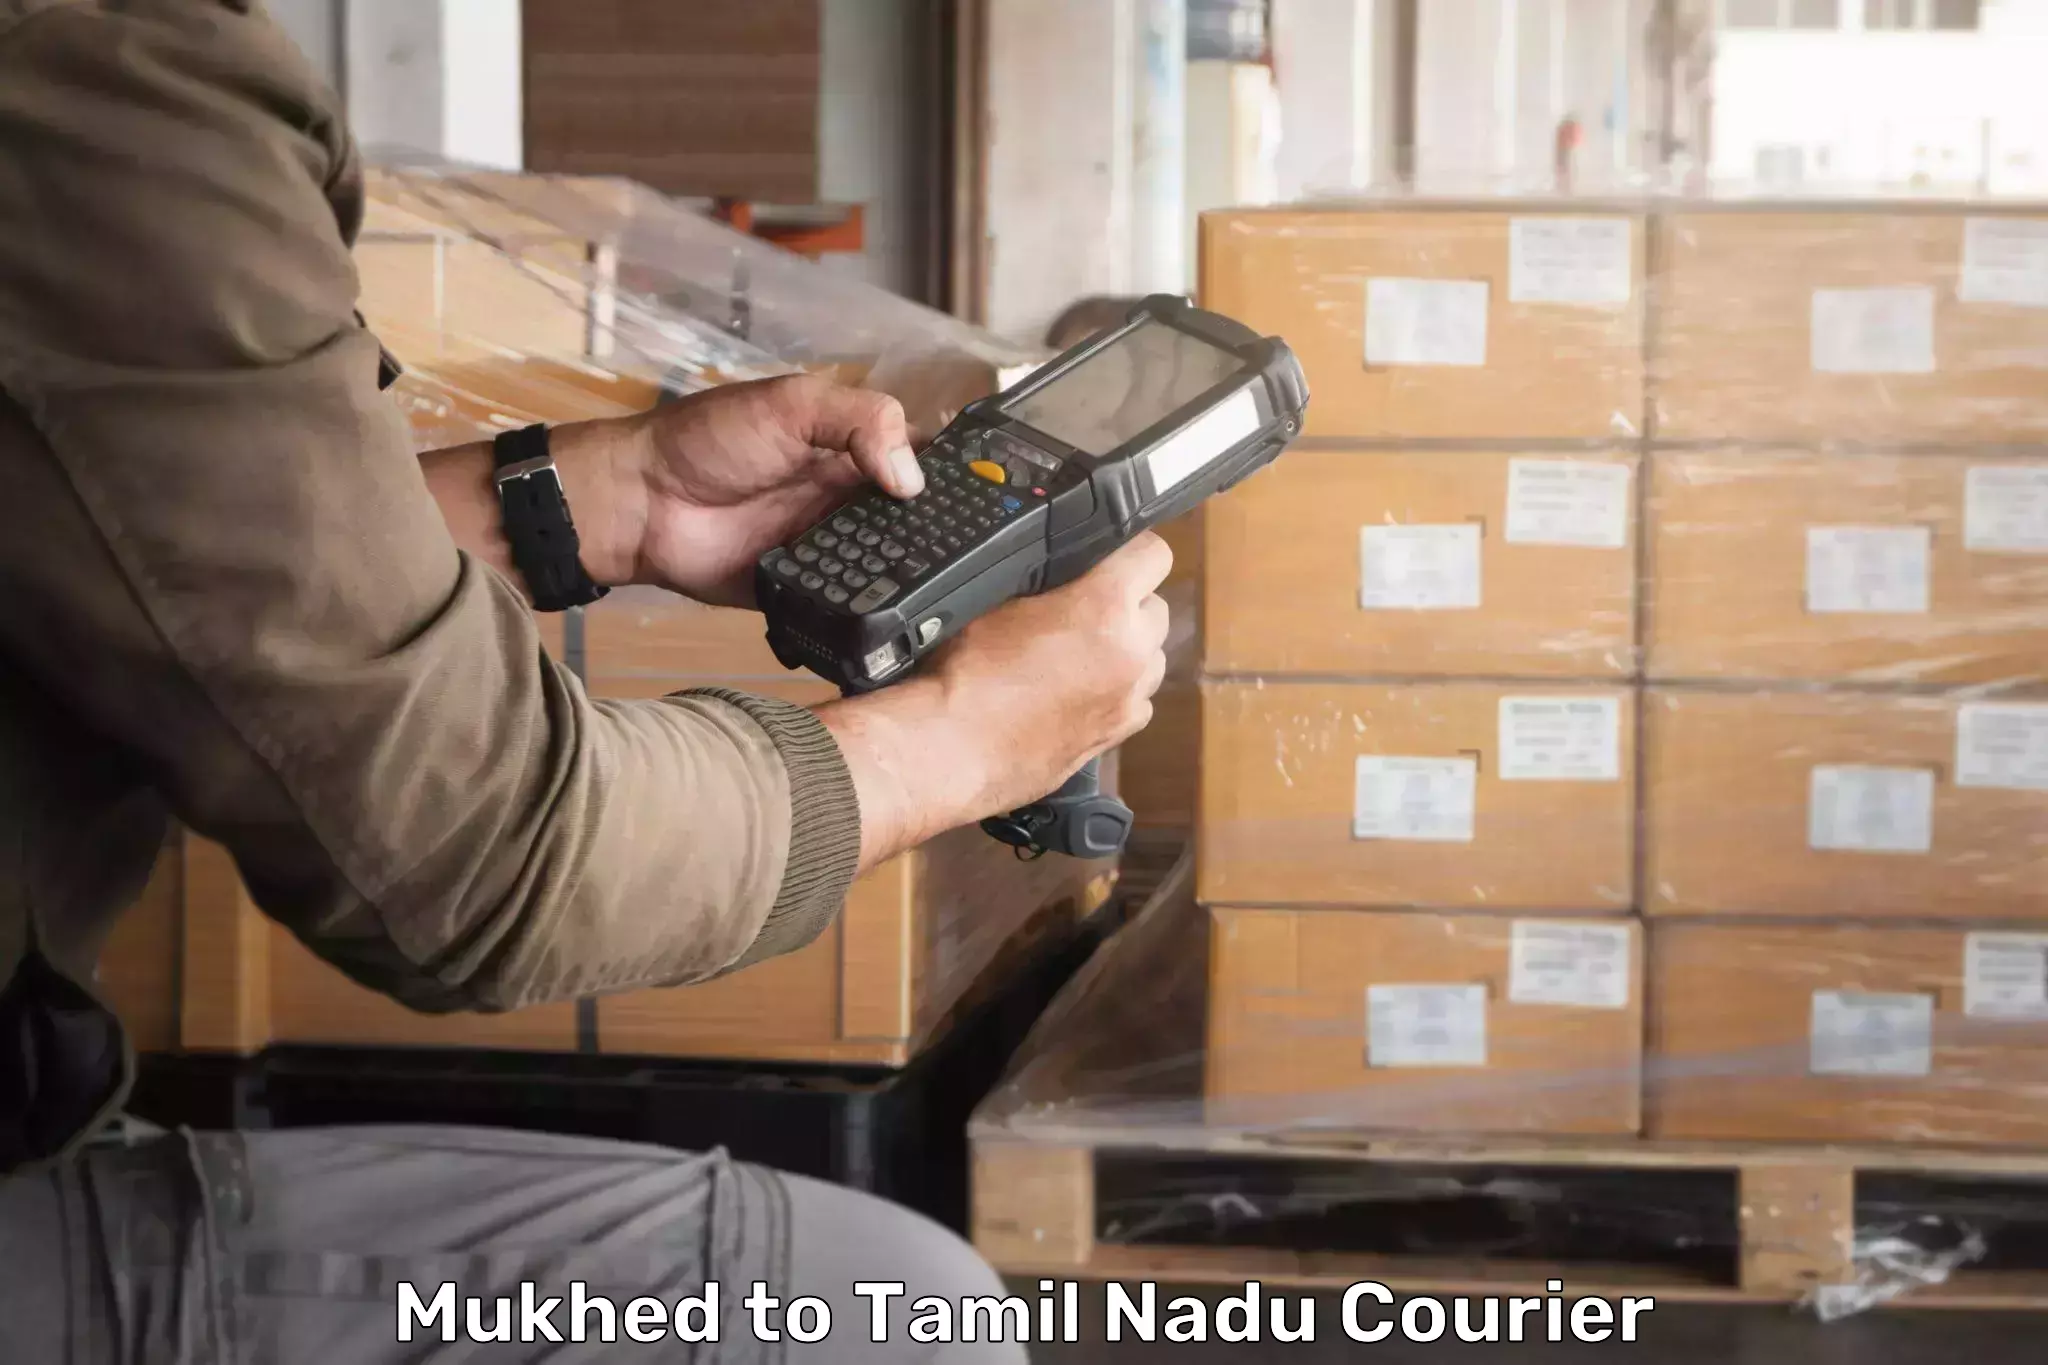 Fast delivery service Mukhed to Tamil Nadu